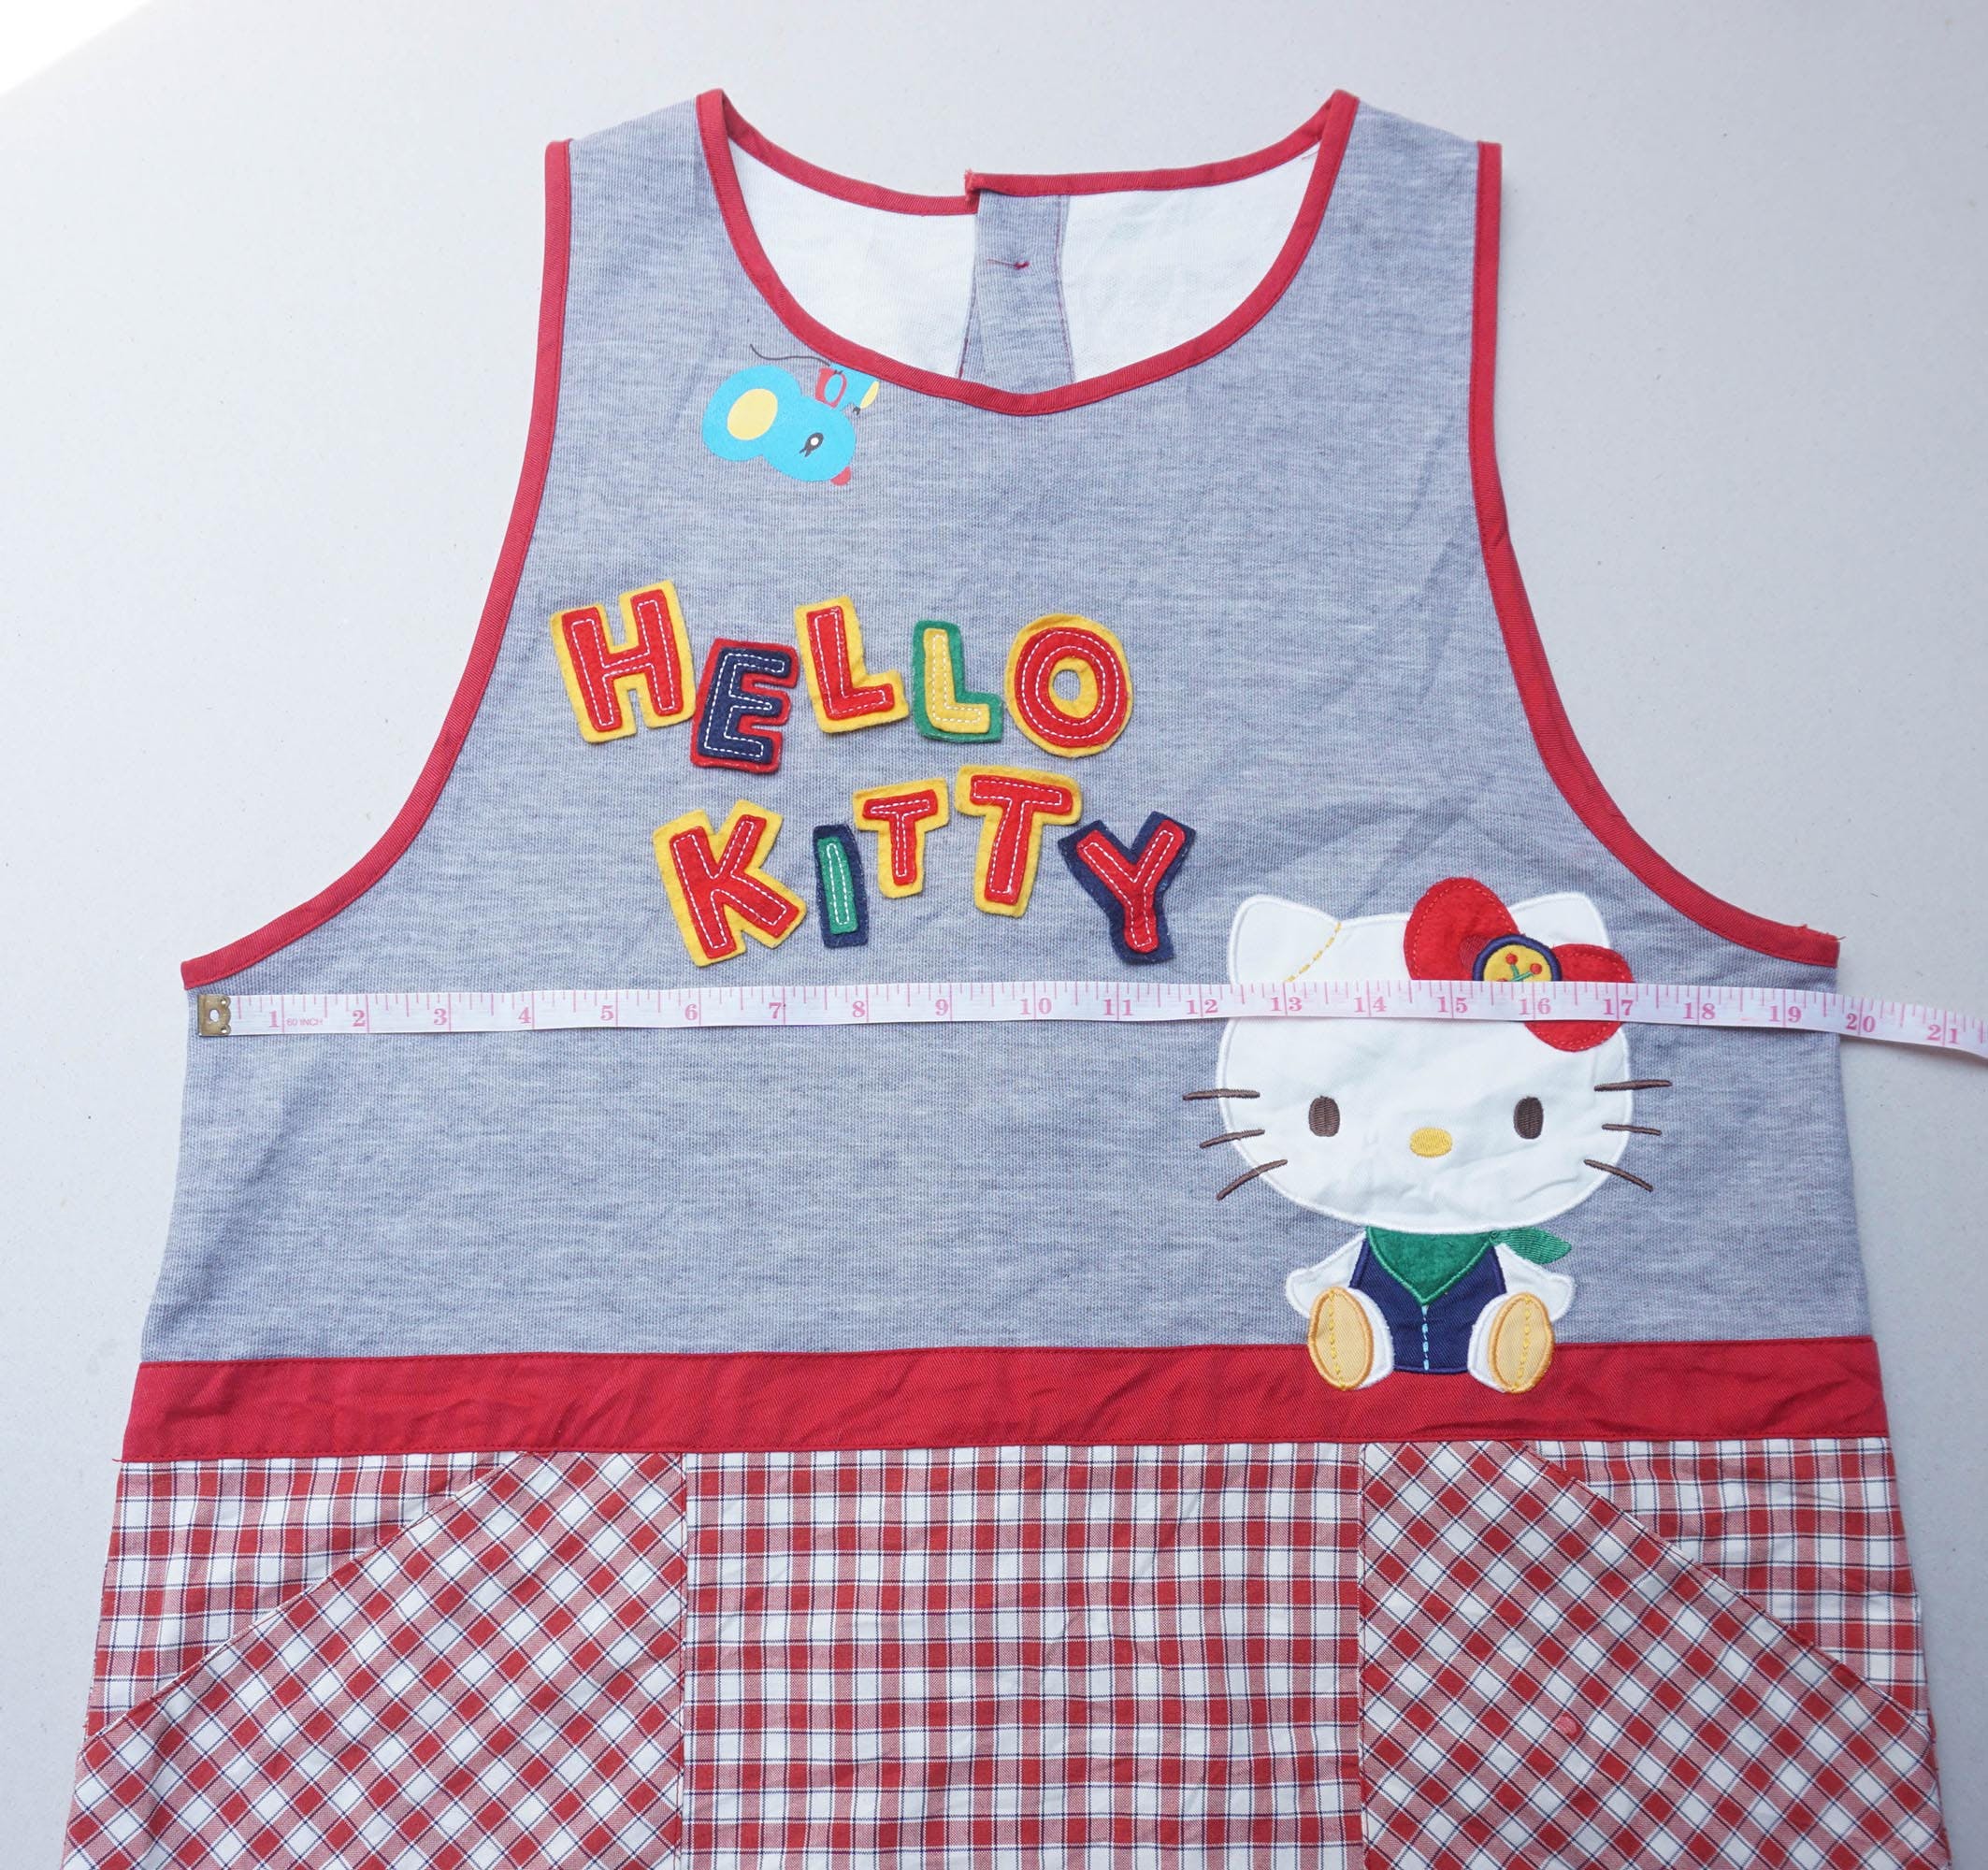 Japanese Brand - HELLO KITTY Patchwork & Checkered Apron - 12